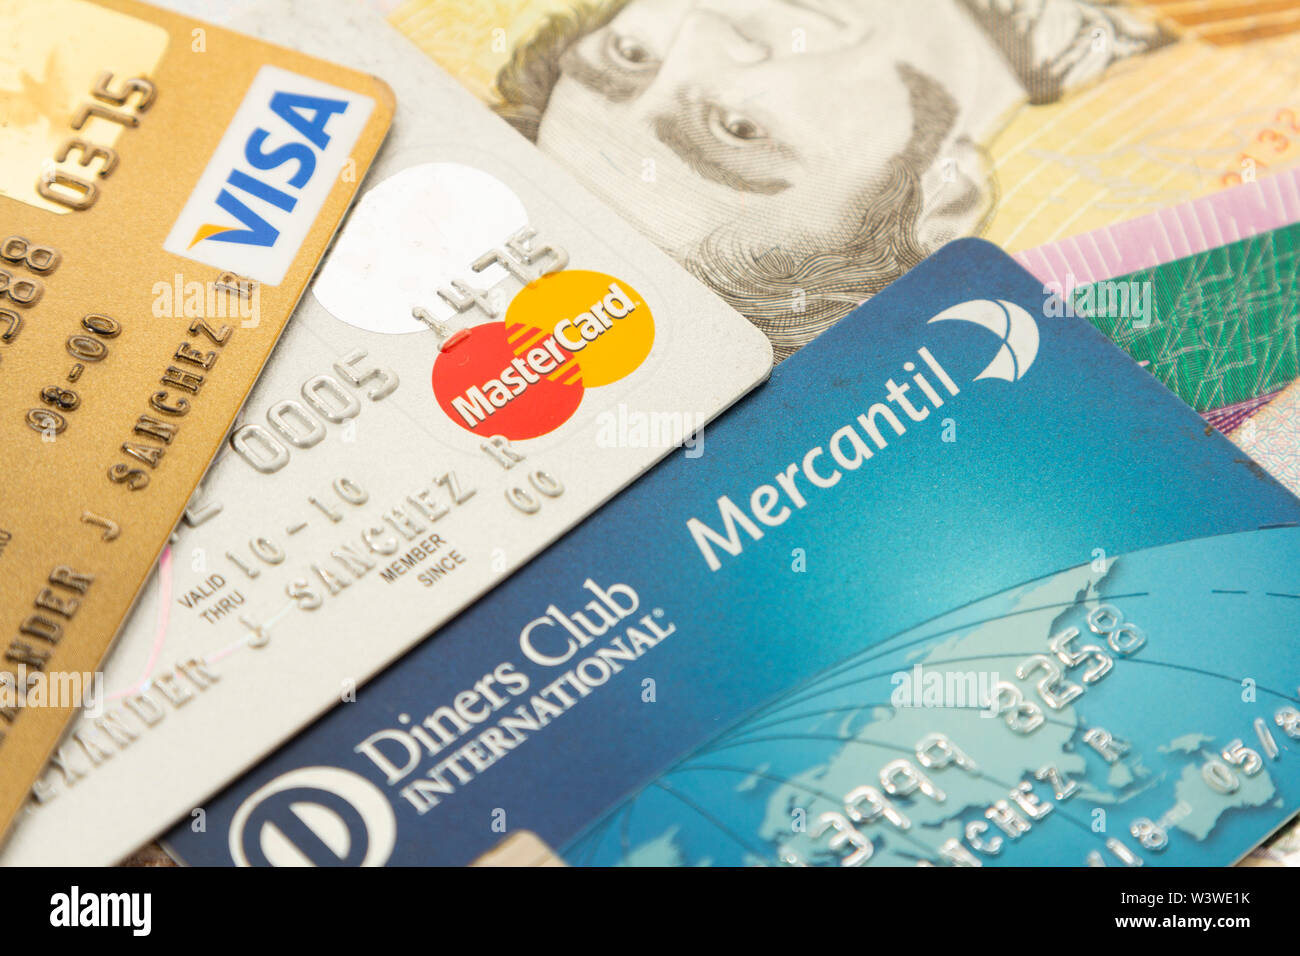 Several credit cards, Visa, Mastercard and Diners Club for use in Venezuela of Venezuelan banks. Stock Photo